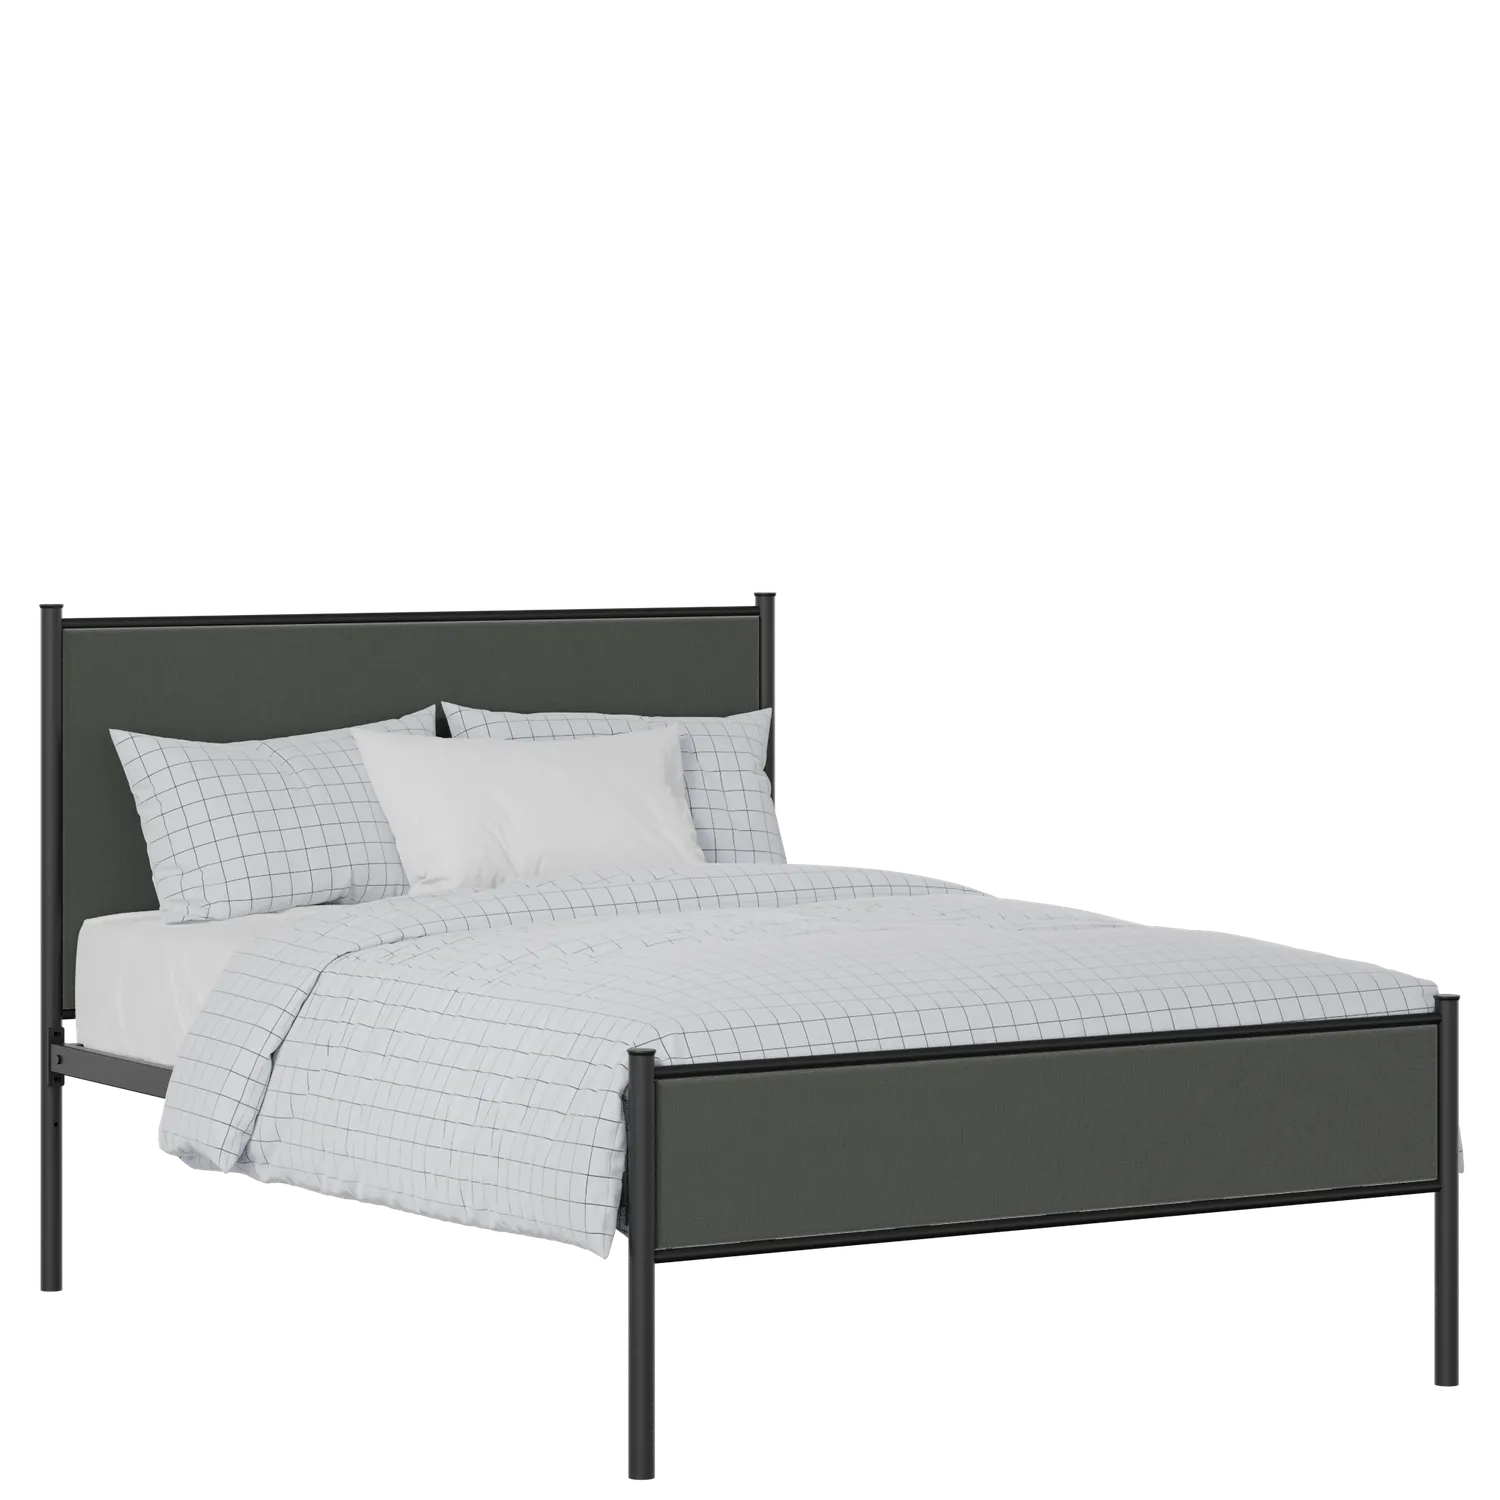 Brest Slim iron/metal upholstered bed in black with iron fabric